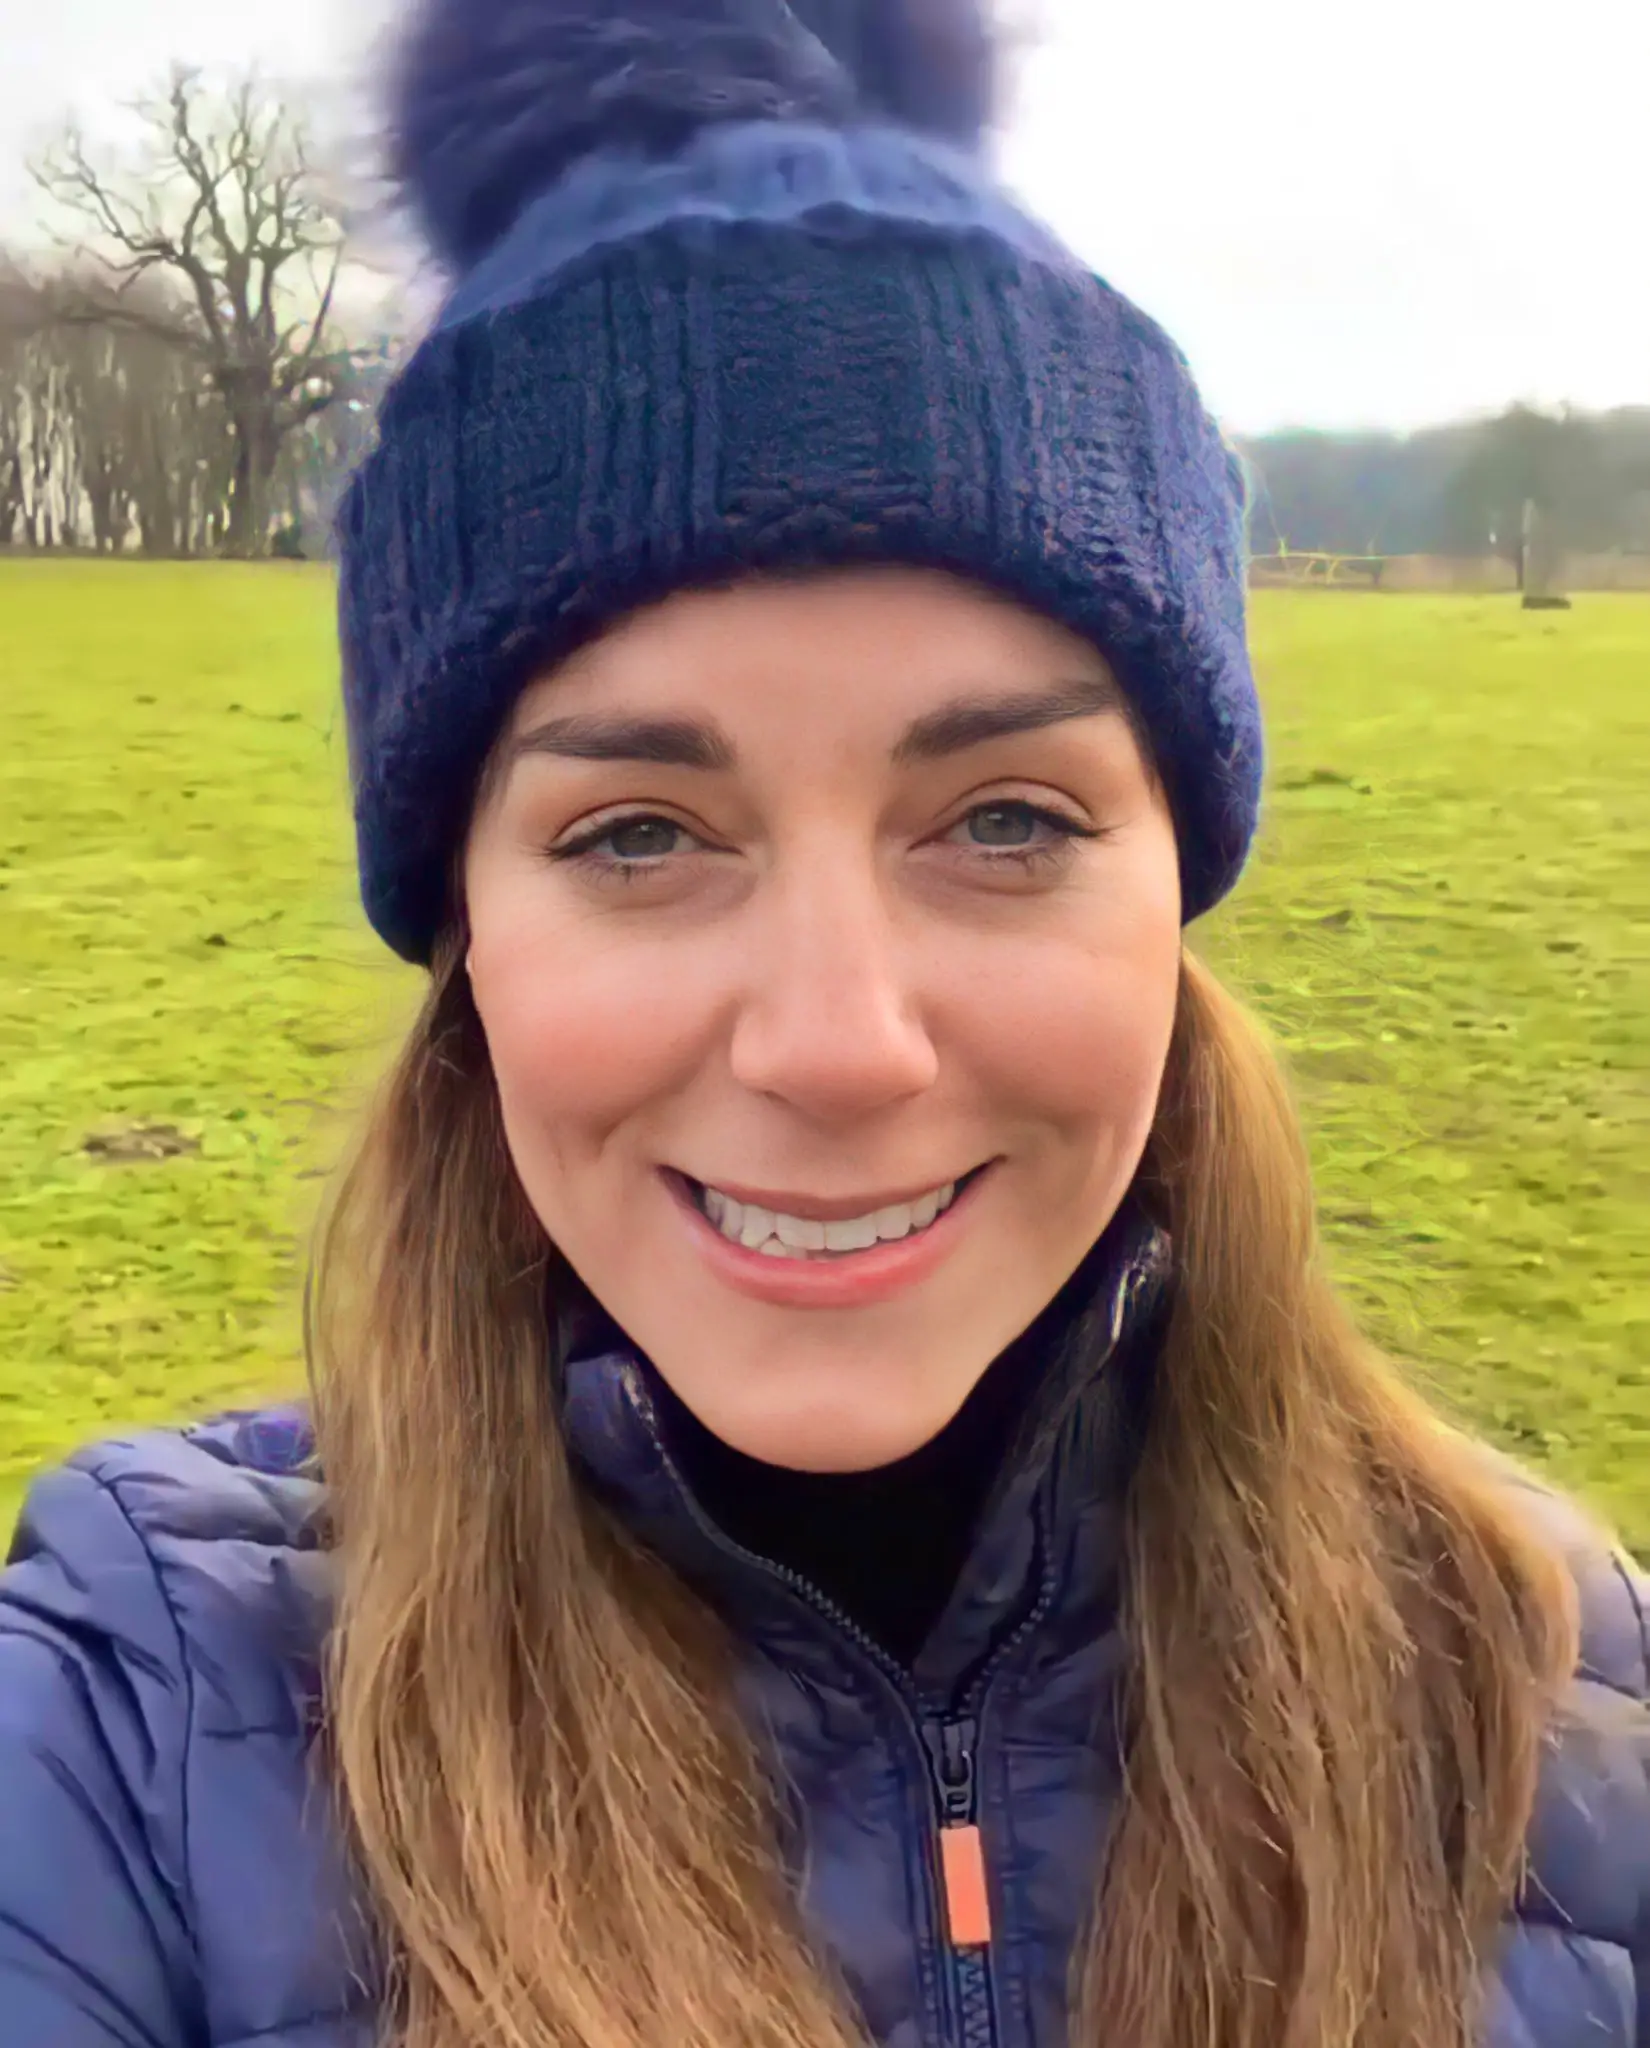 The Duchess of Cambridge wore Barbour Navy Women’s Longshore Quilted Jacket in her very first selfie video